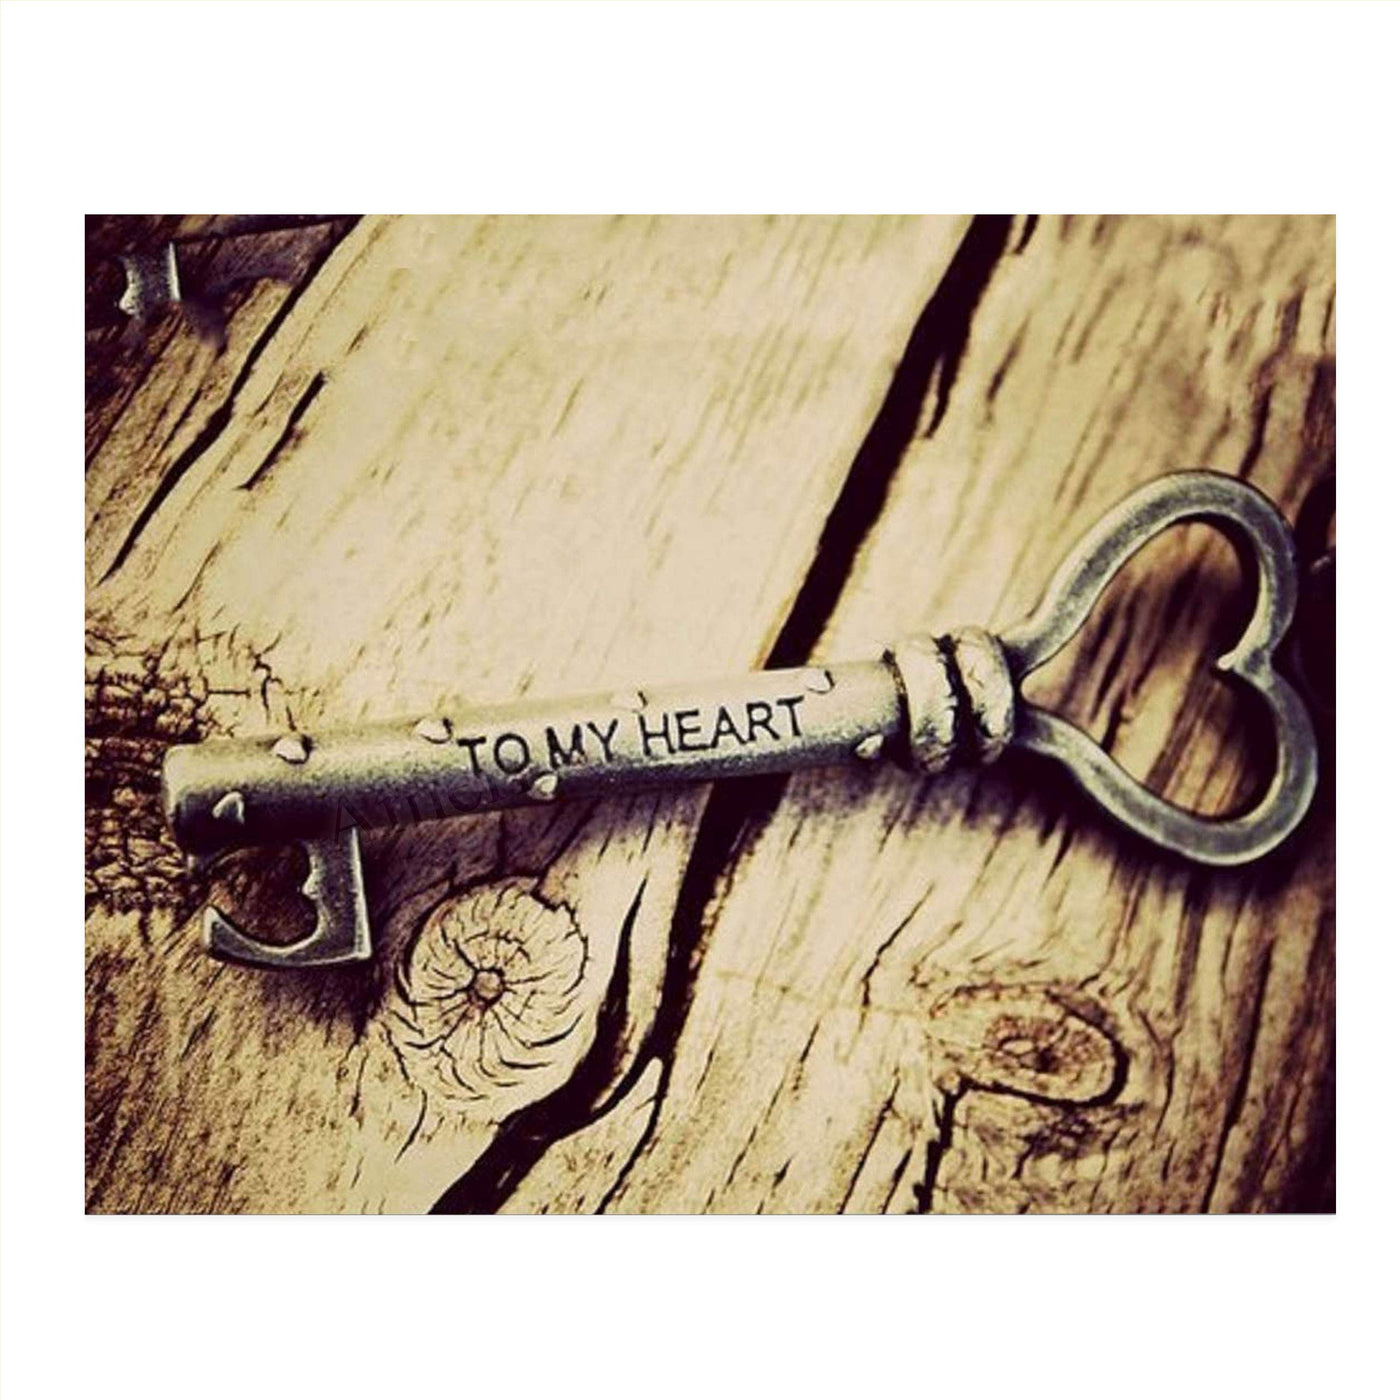 Key To My Heart- Love Wall Art Print- 10 x 8" Romantic Wall Decor-Ready to Frame. Vintage Photography Print for Home-Bedroom-Office Decor. Special Lifetime Gift To Simply Convey How You Feel!